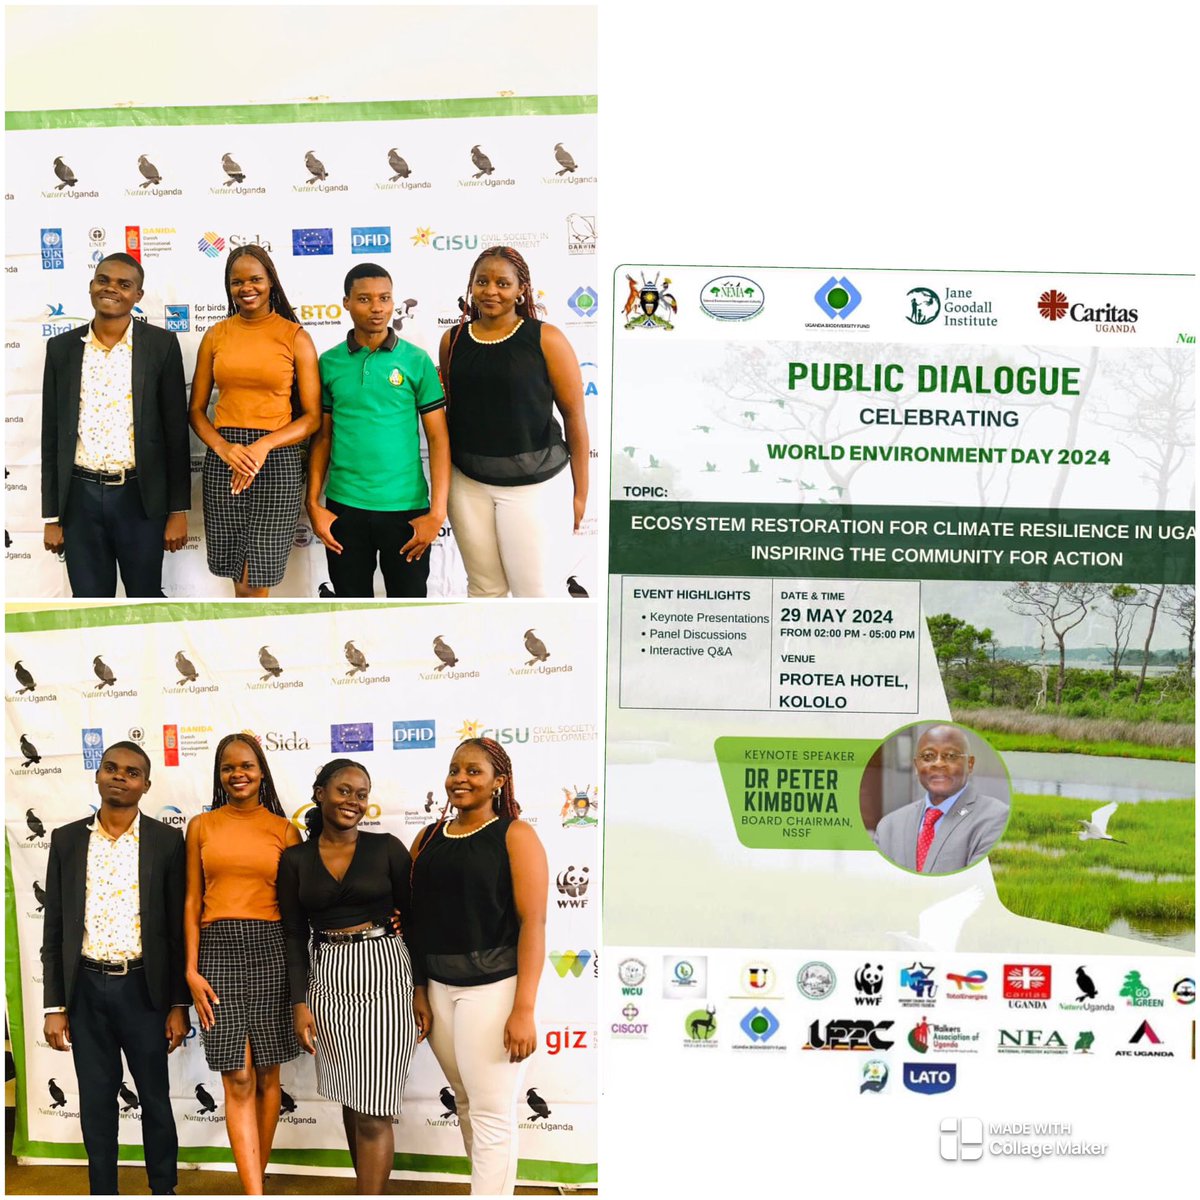 Today our team joined the tourism stakeholders for a public dialogue celebrating world environment day 2024.With our core value of sustainability we are always positive in environmental protection programs 
#sustainabletourism
#kaluyaworldsafaris